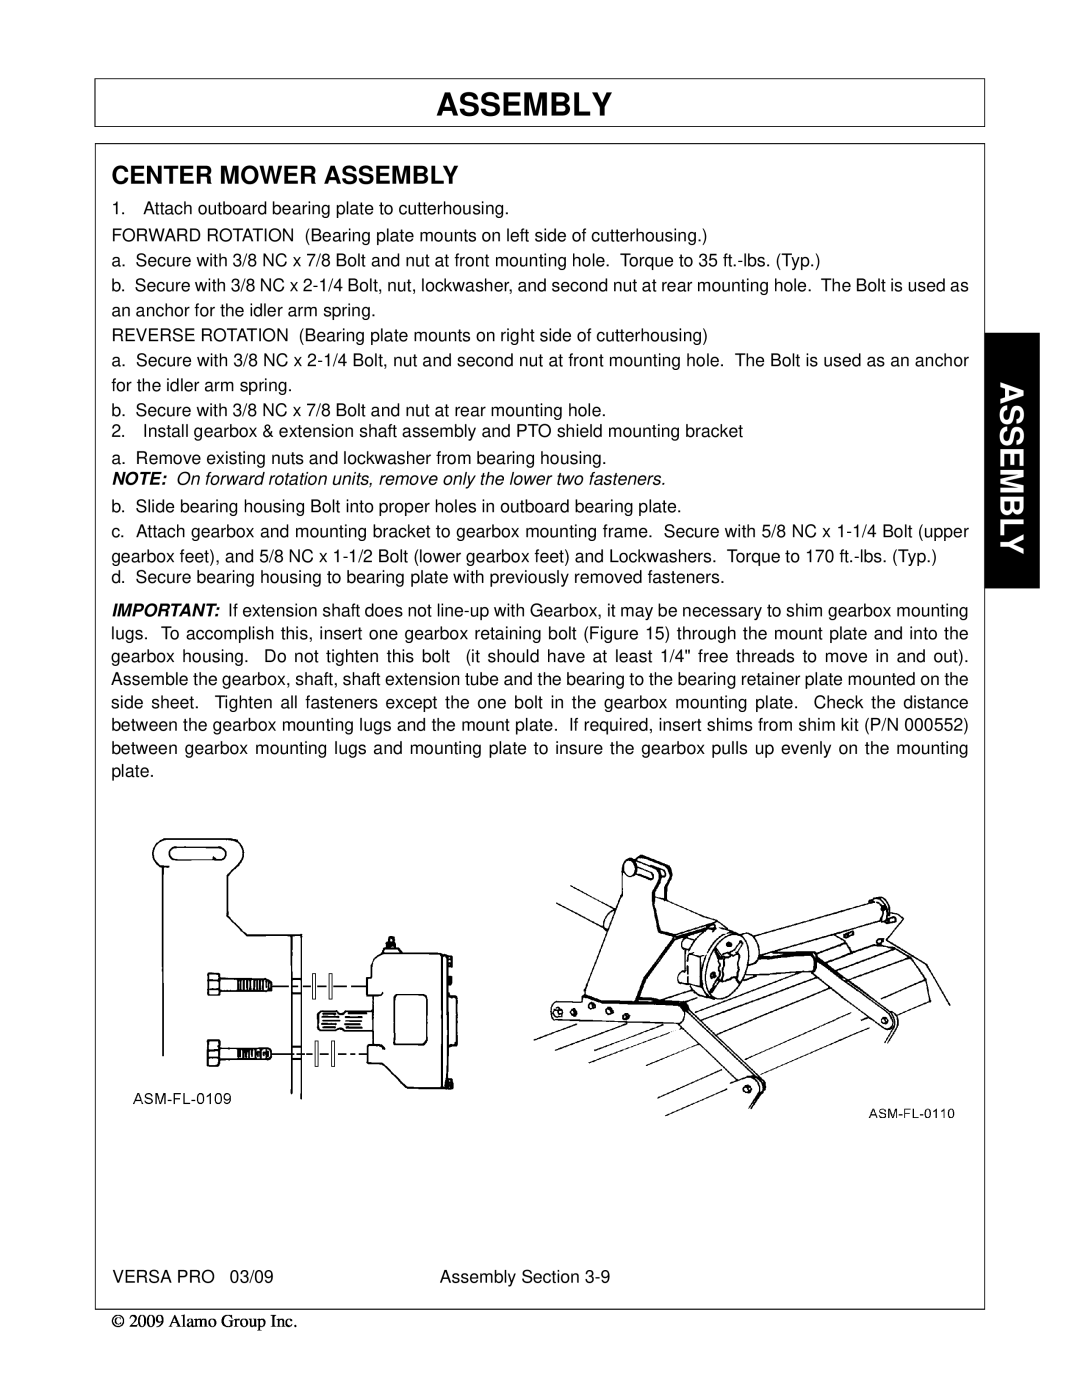 Alamo 803350C manual Center Mower Assembly, Attach outboard bearing plate to cutterhousing 